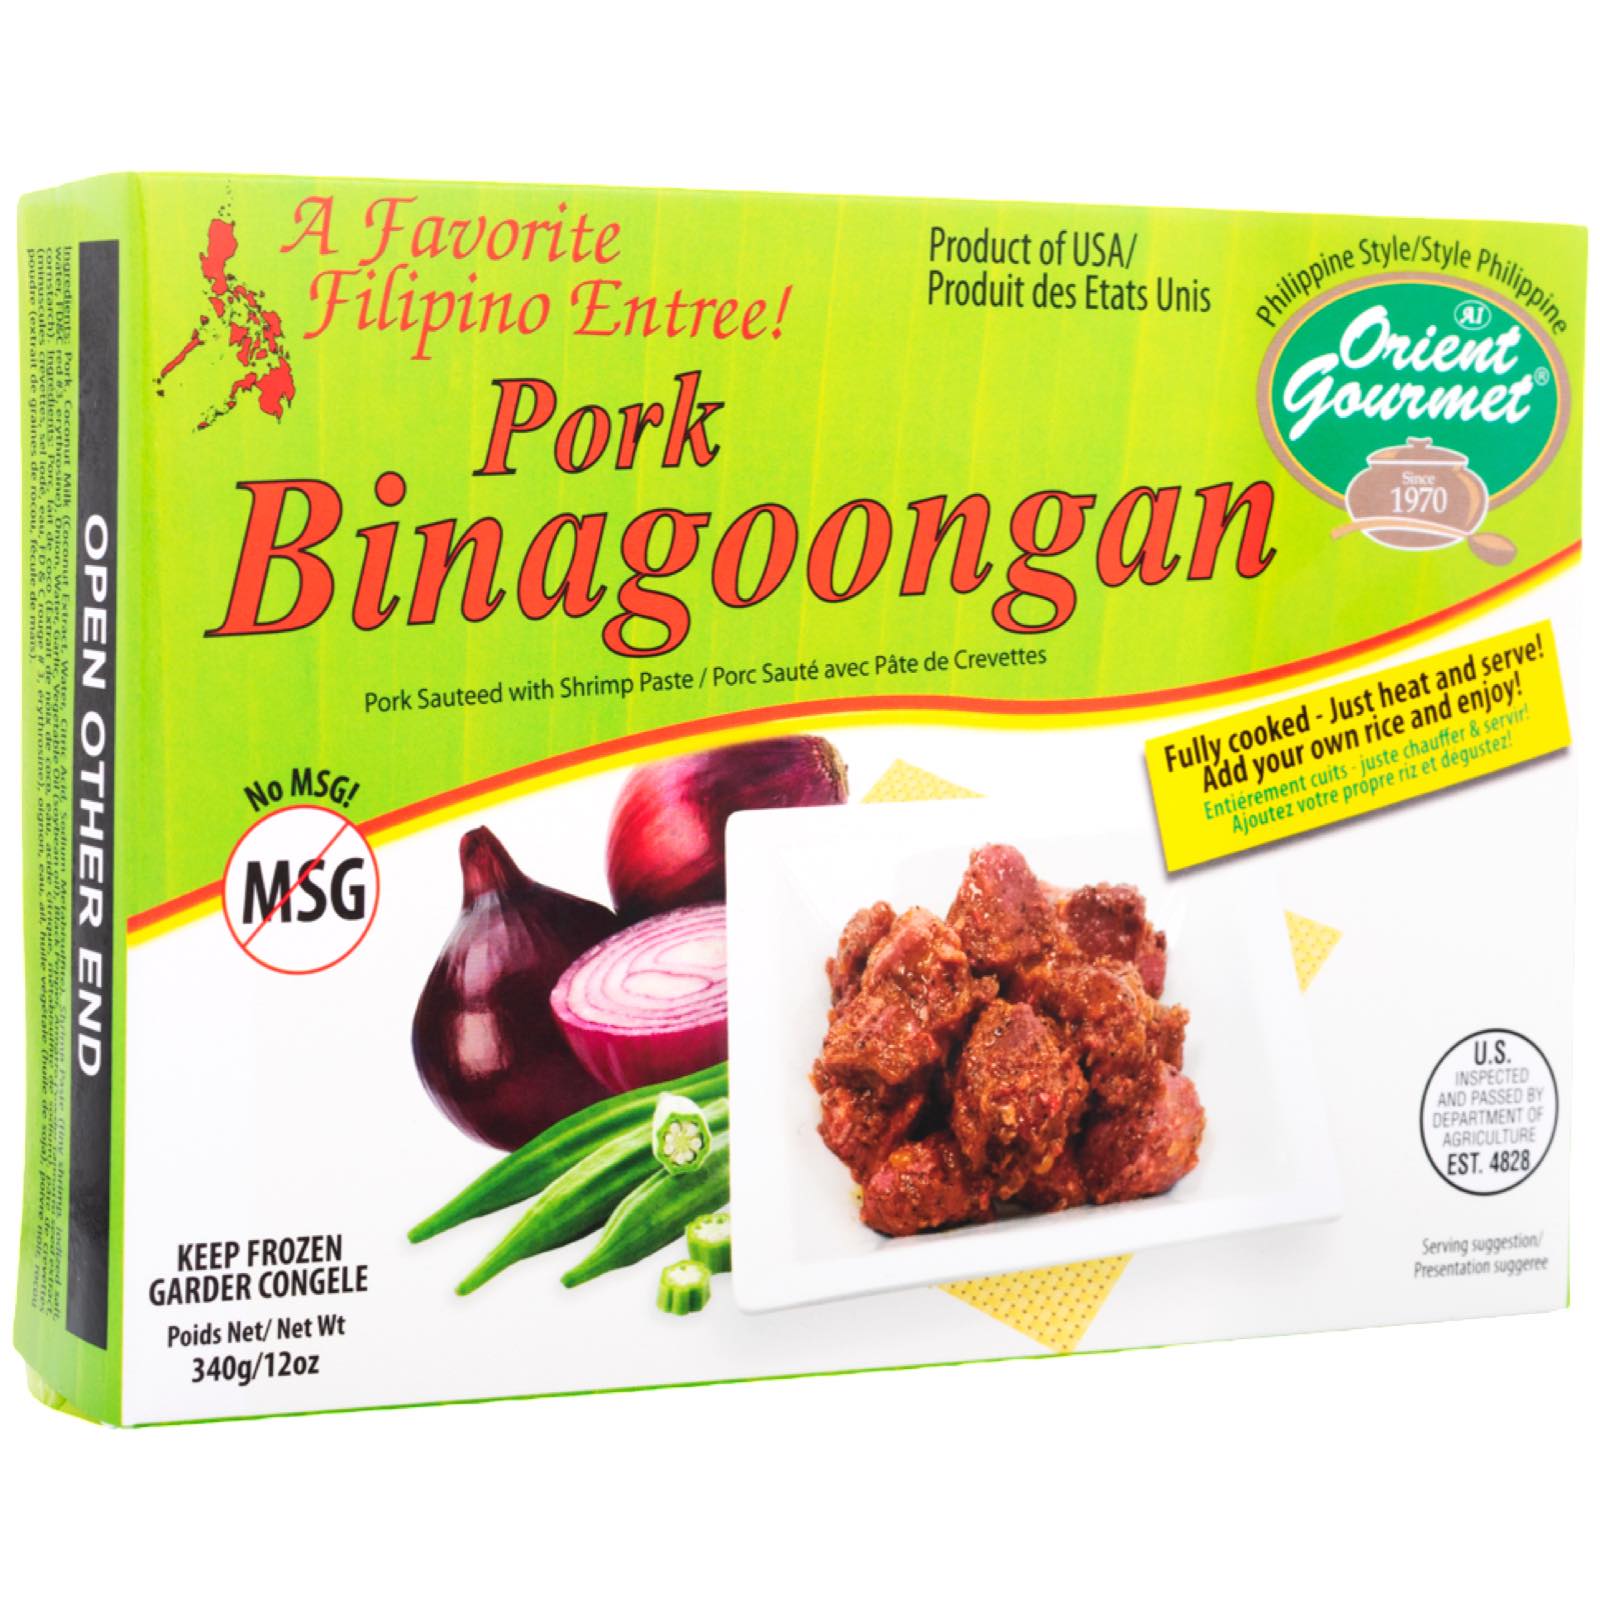 Orient Gourmet - Pork Binagoongan - Pork Sauteed with Shrimp Paste  - Fully Cooked - Just Heat and Serve - 12 OZ